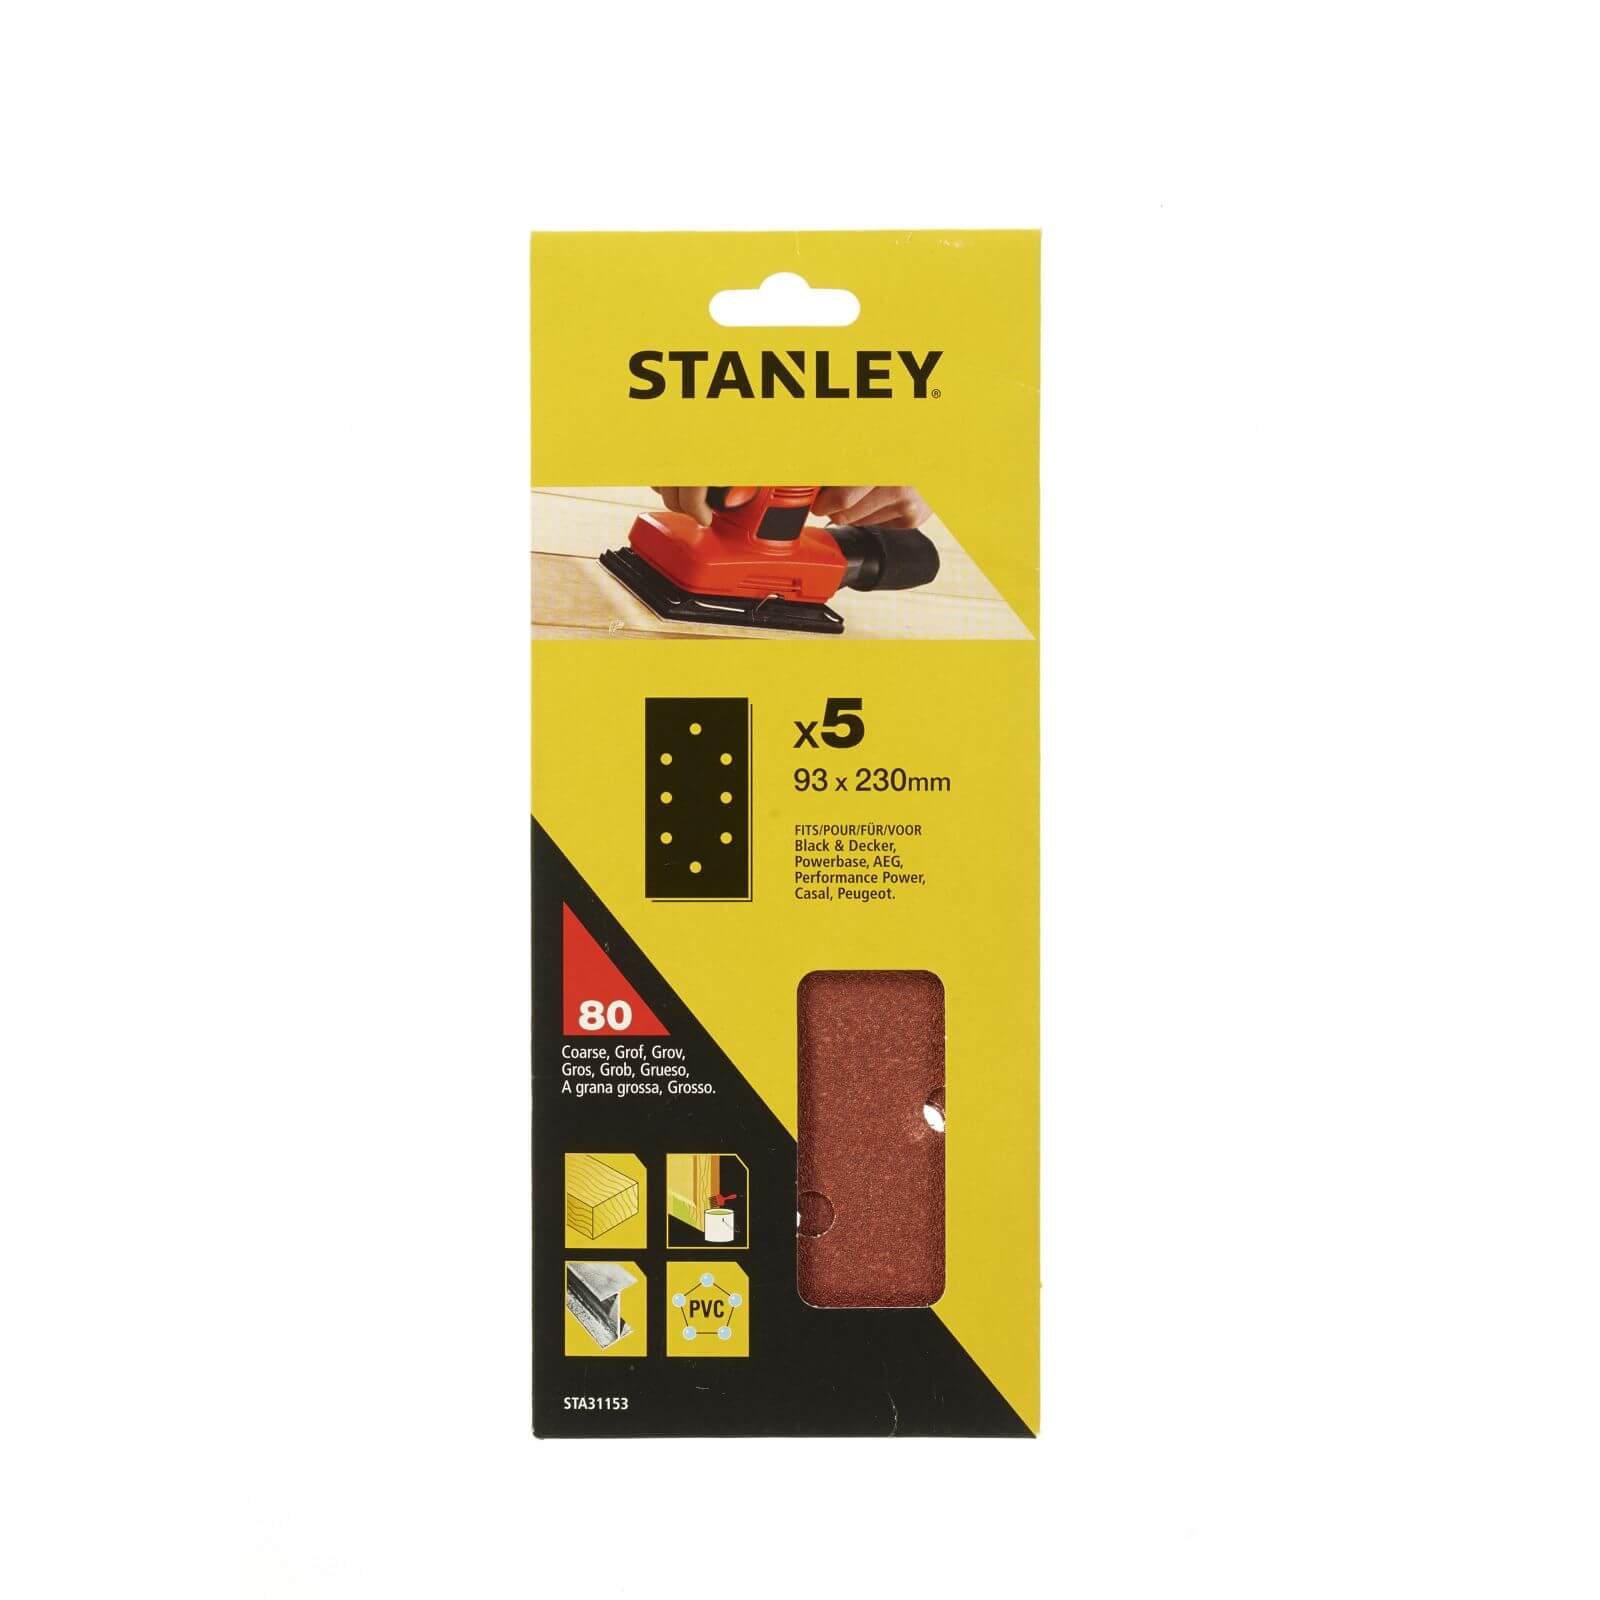 Stanley 1/3 Sheet Sander Punched Wire Clip 80G Sanding Sheets - STA31153-XJ